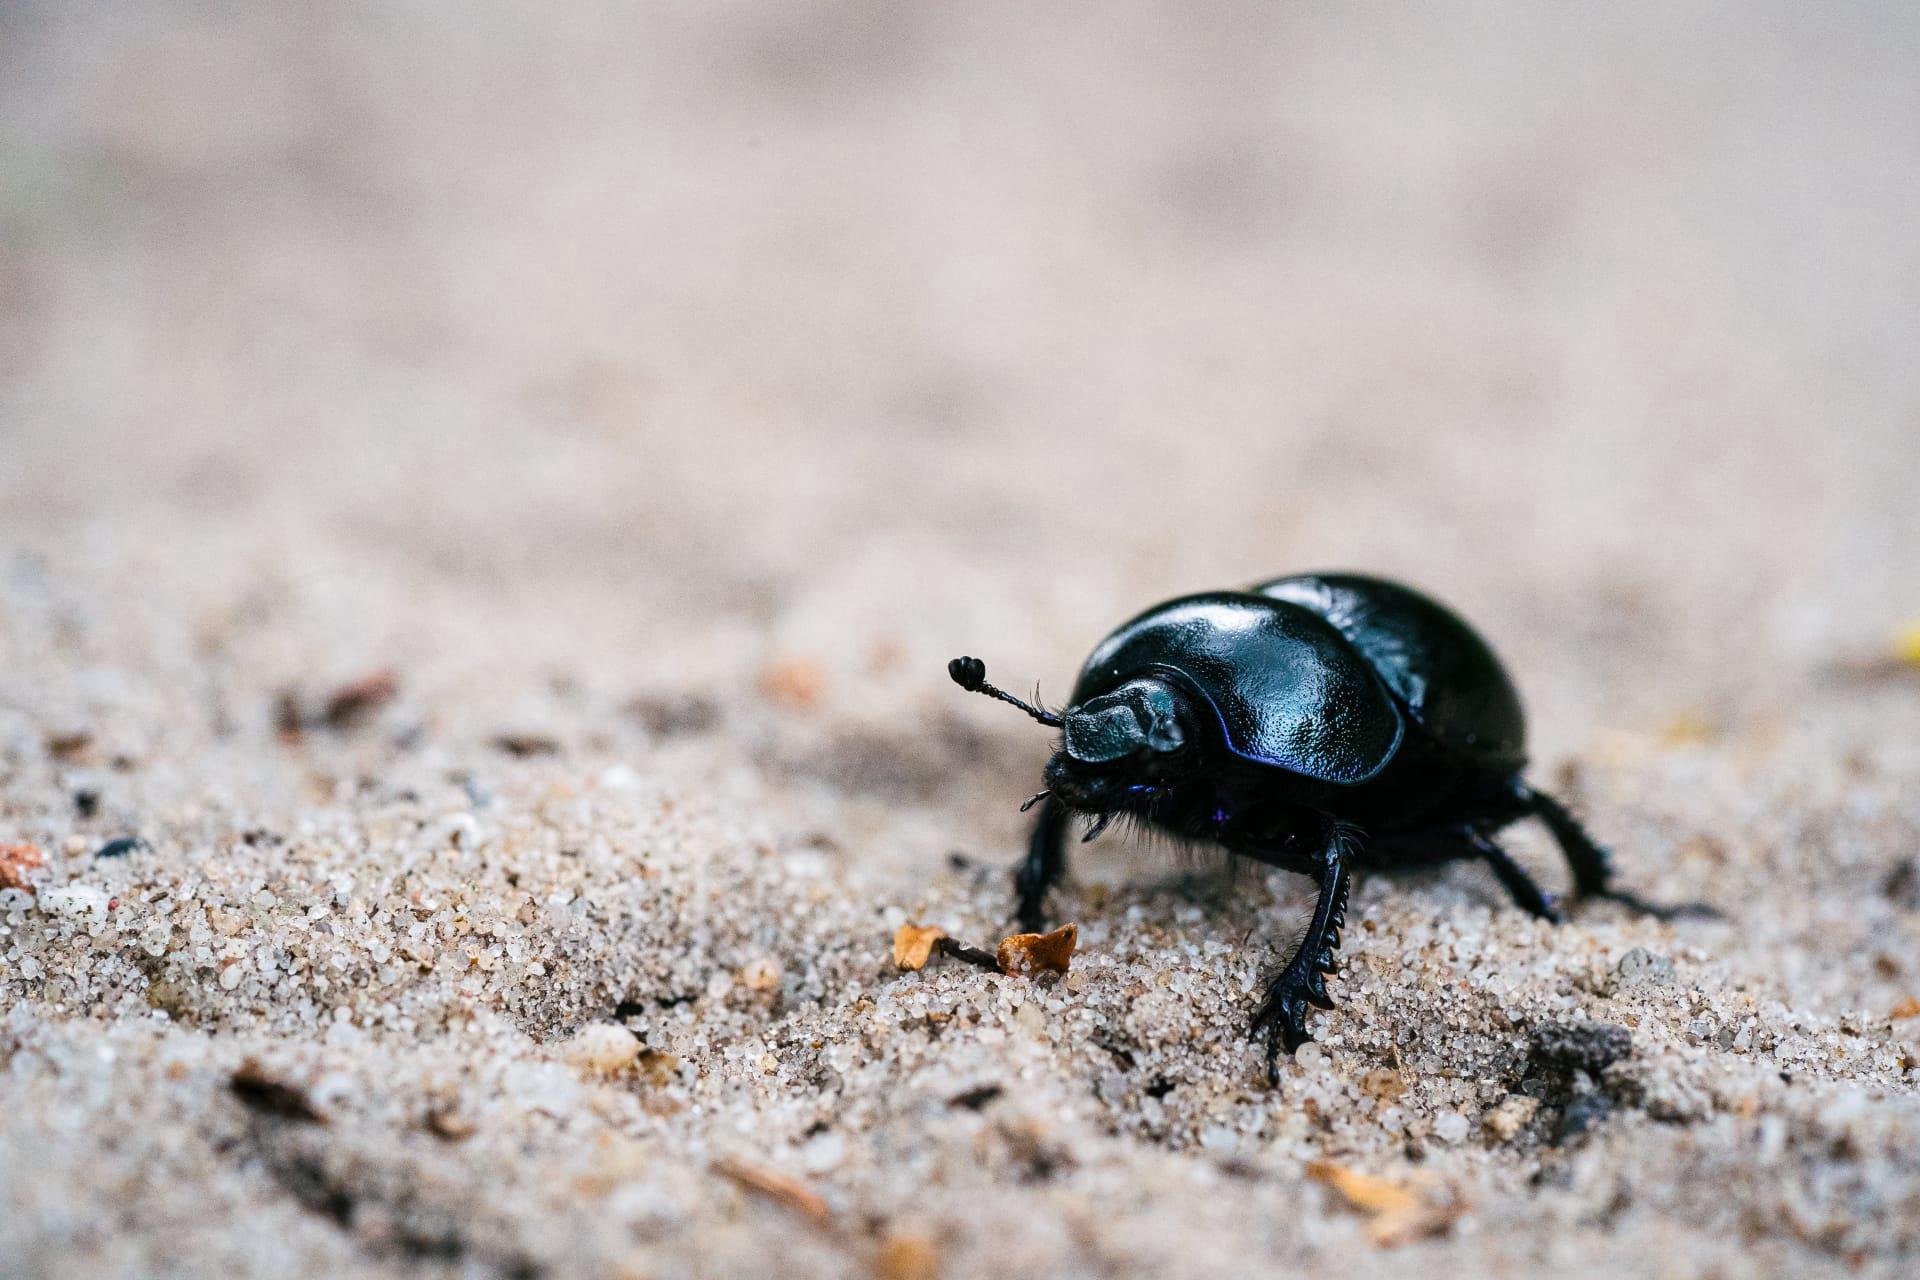 Black beetle pictures